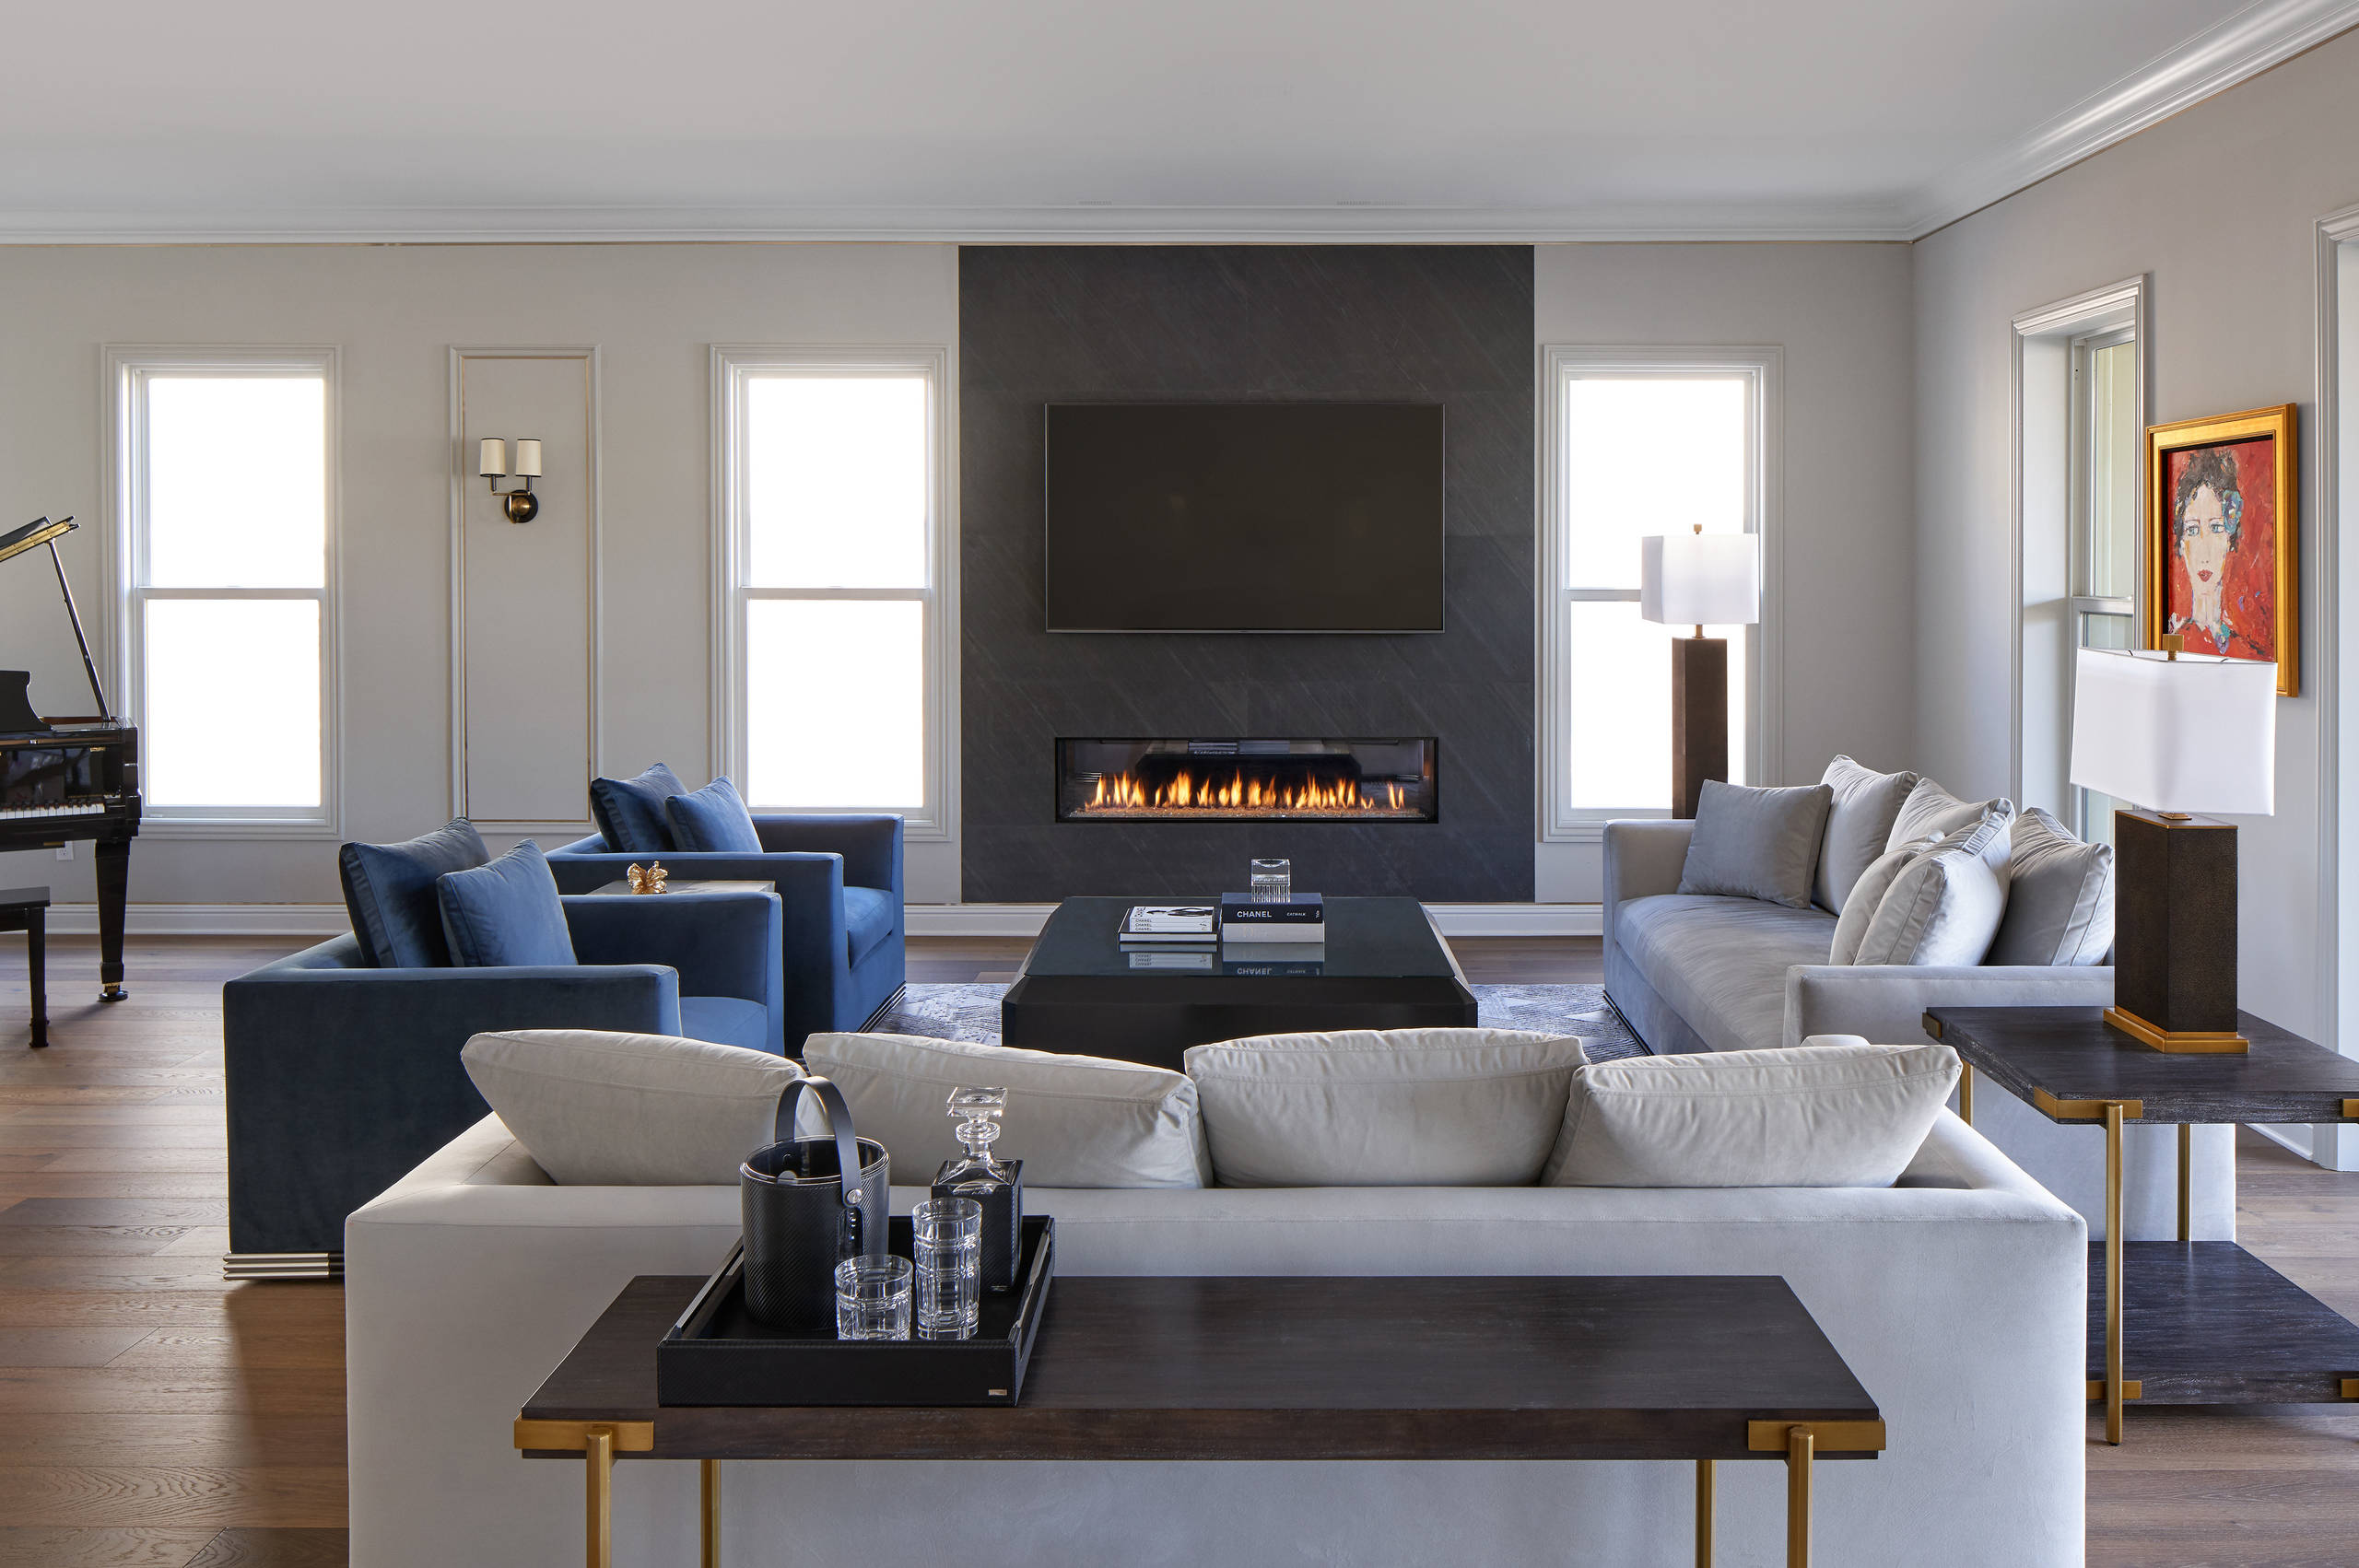 75 Living Room With Black Walls Ideas You'Ll Love - August, 2023 | Houzz